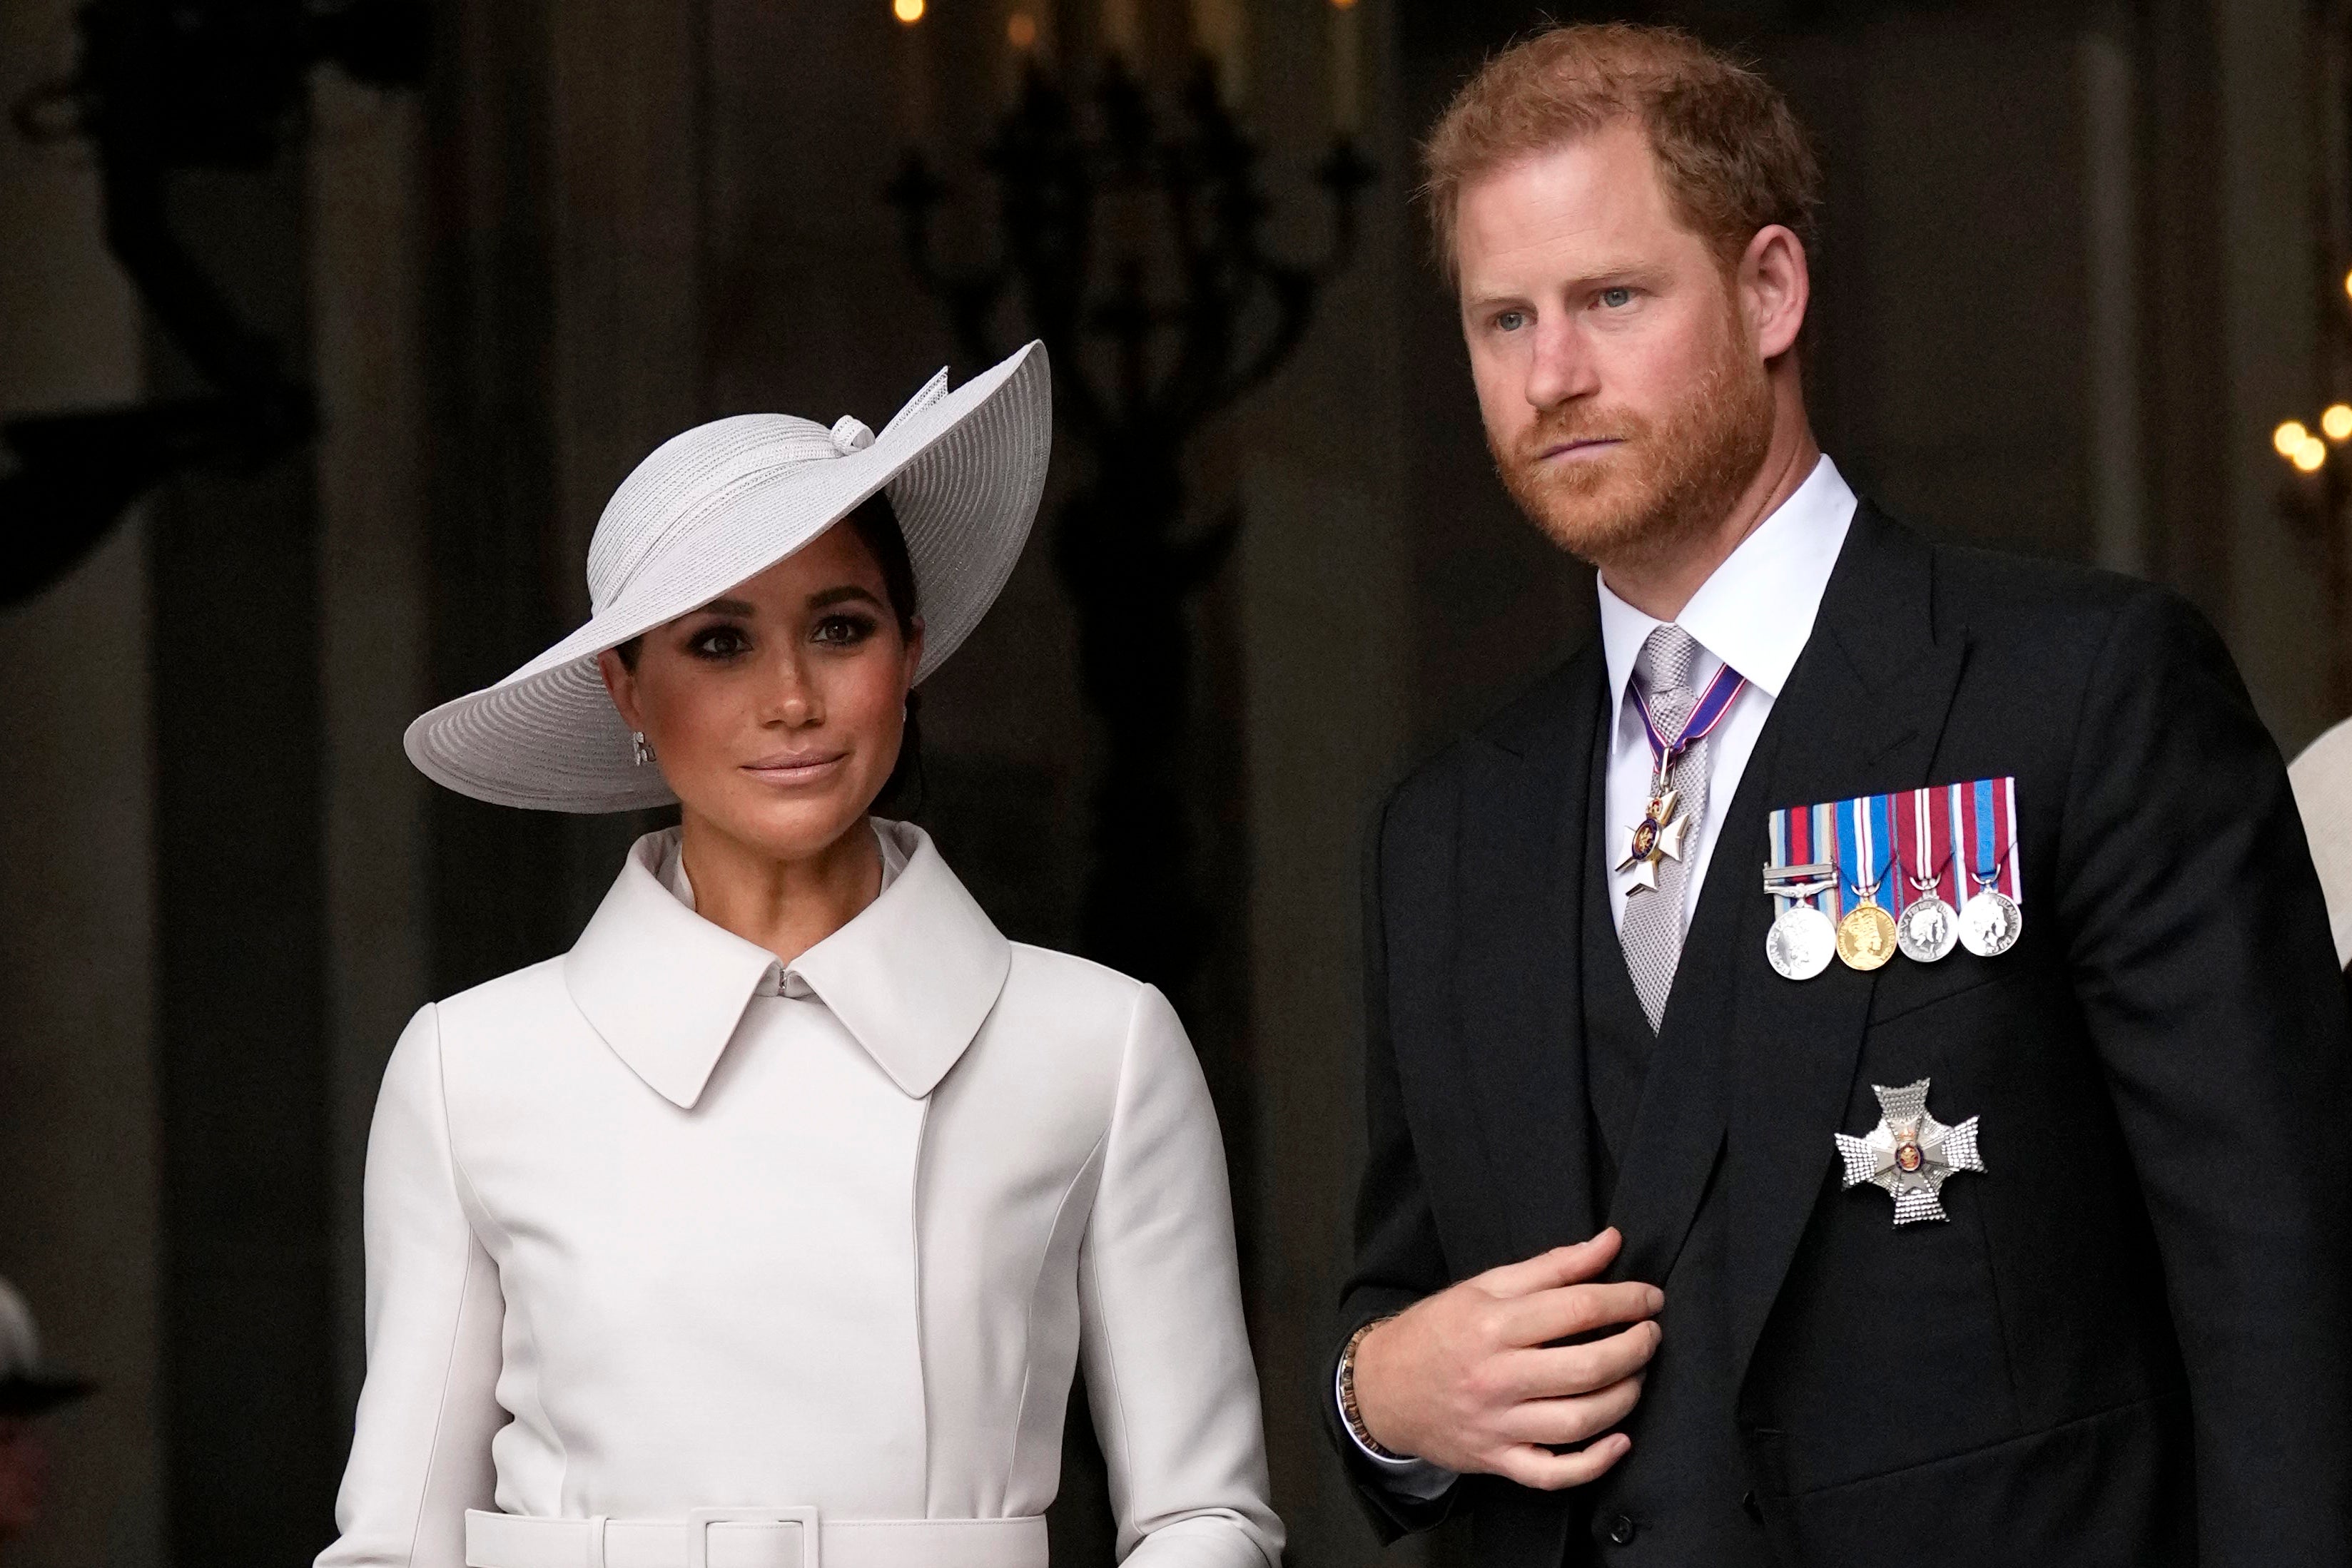 Harry and Meghan signed several lucrative deals after leaving the Royal Family in 2020